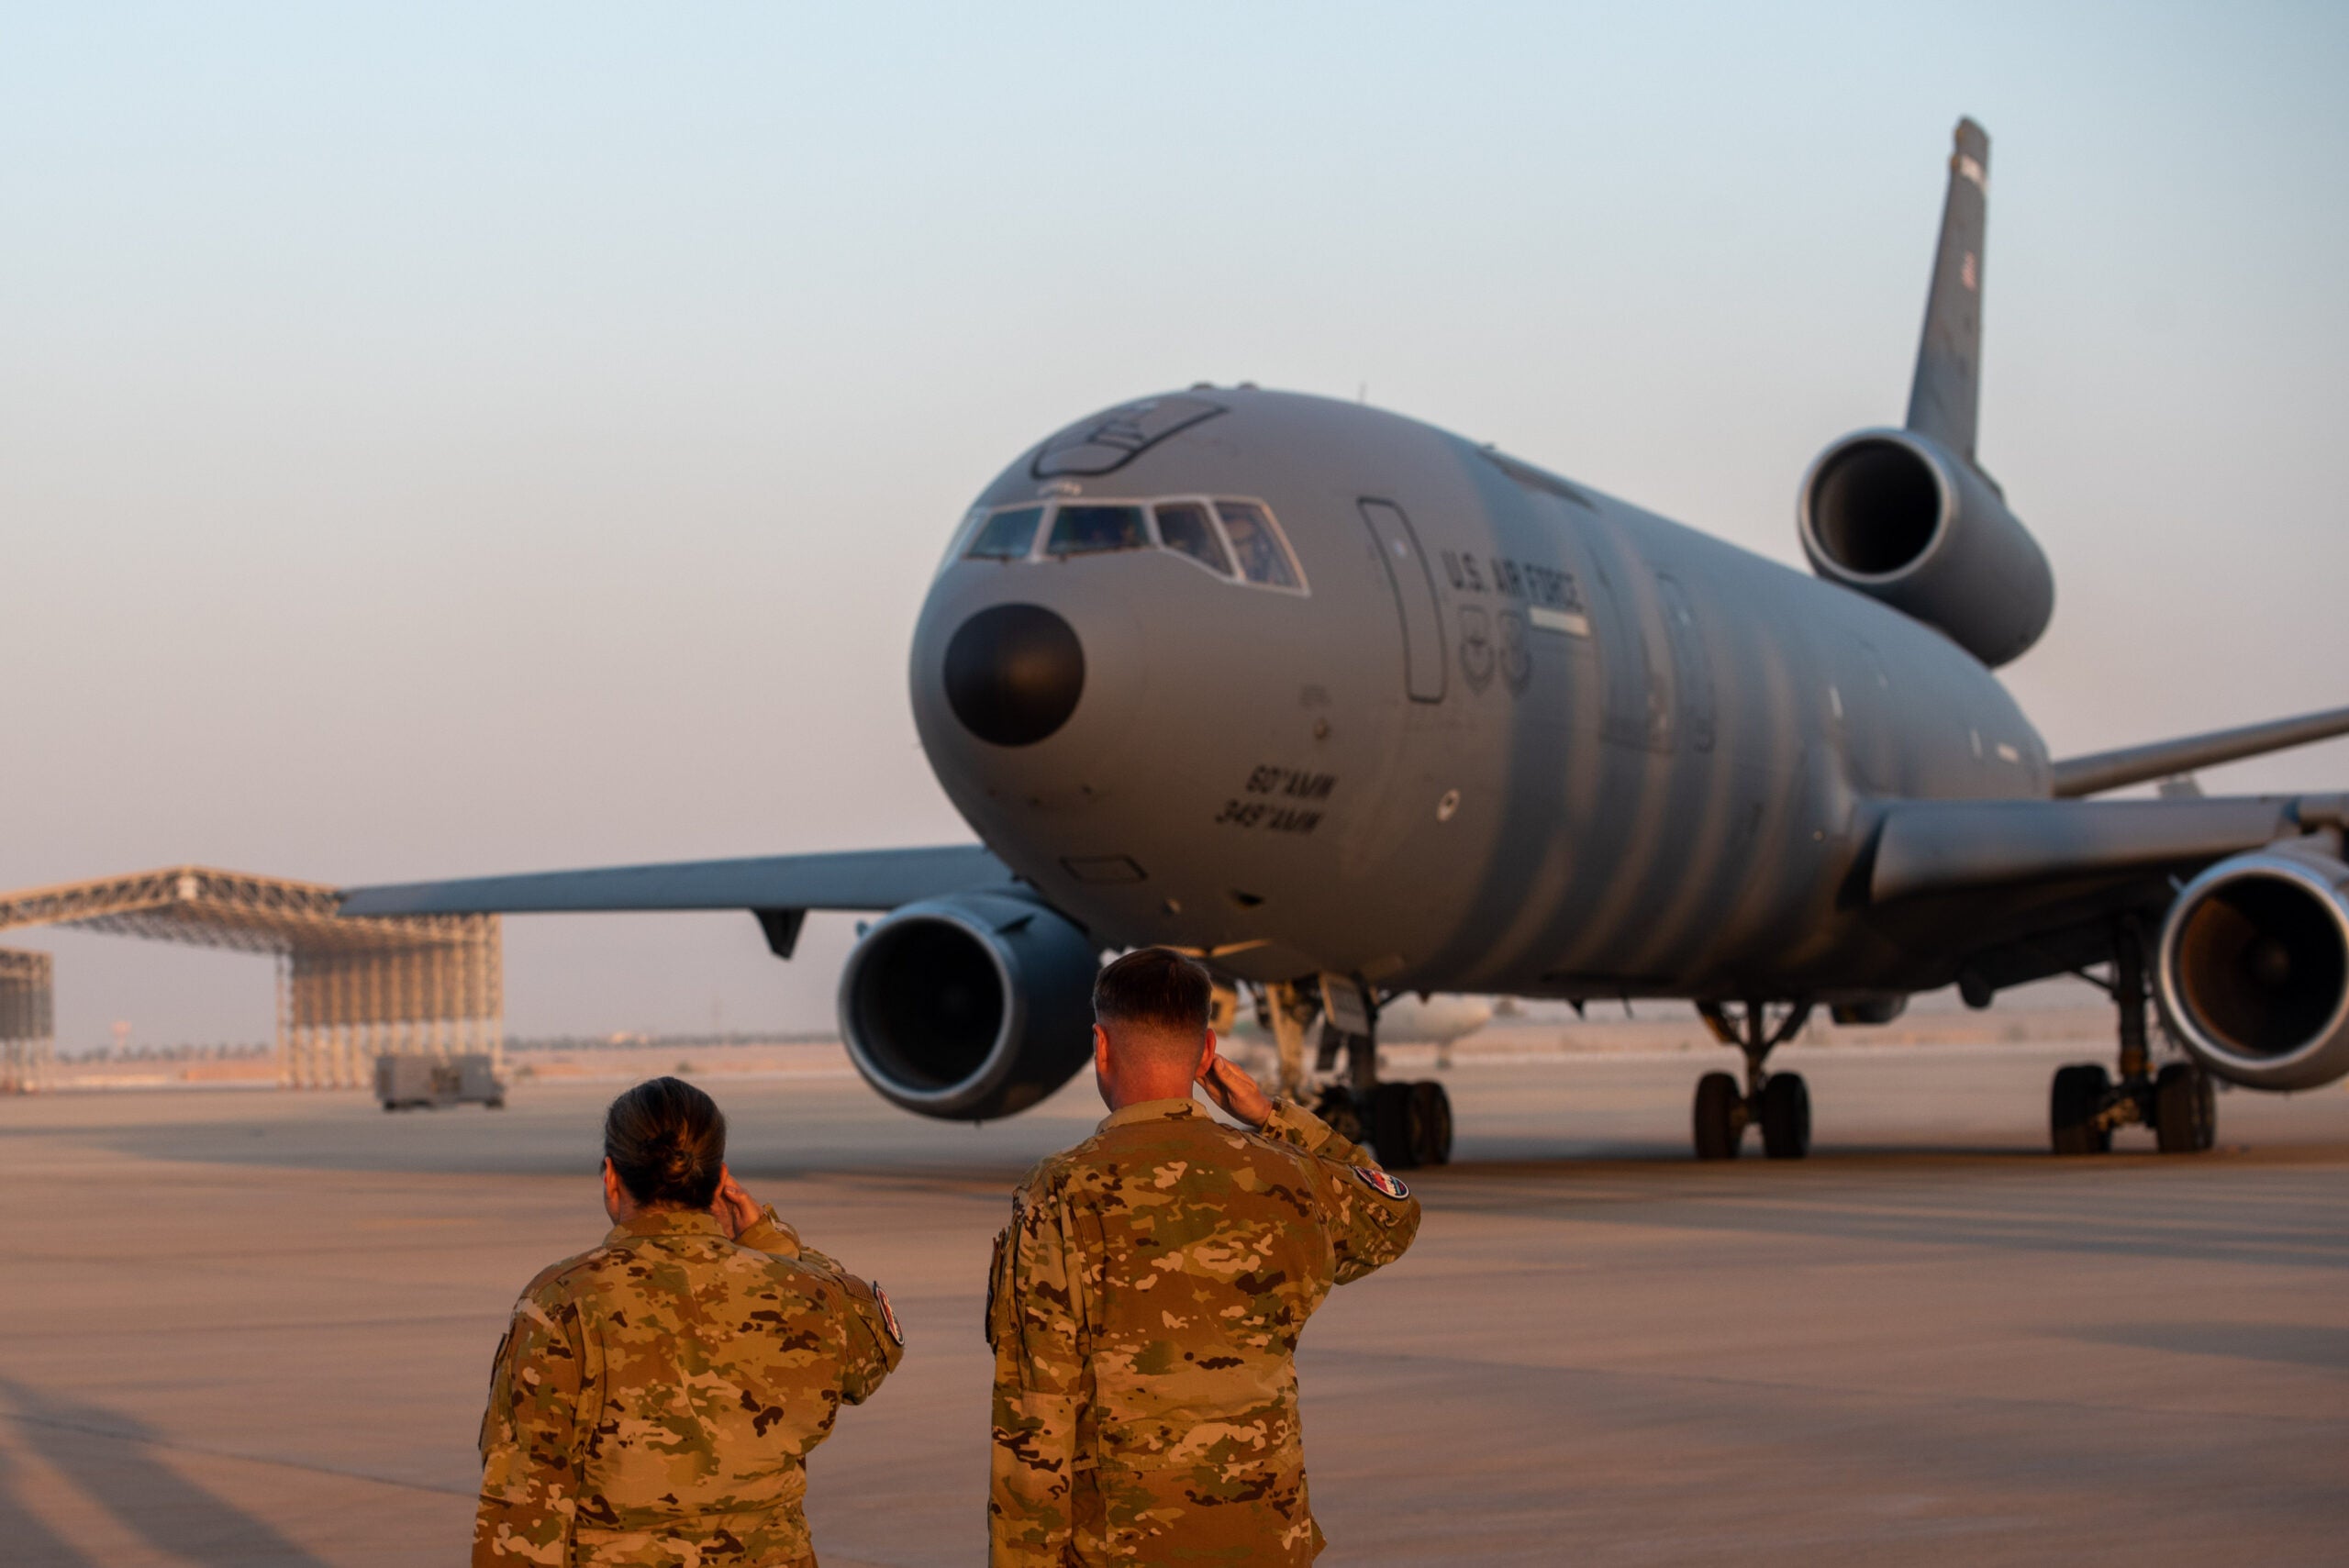 U.S. Airmen salute a KC-10 as it begins to depart after conducting the airframe's final combat deployment at Prince Sultan Air Base (PSAB), Kingdom of Saudi Arabia, Oct. 5, 2023. The departure of the KC-10 at PSAB marked the end of the airframe's over 30 years of service within the U.S. Air Forces Central (AFCENT) Area of Responsibility. By September 2024, the U.S. Air Force's fleet of KC-10s will be decommissioned and gradually replaced by the KC-46 aircraft. (U.S. Air Force photo by Tech. Sgt. Alexander Frank)